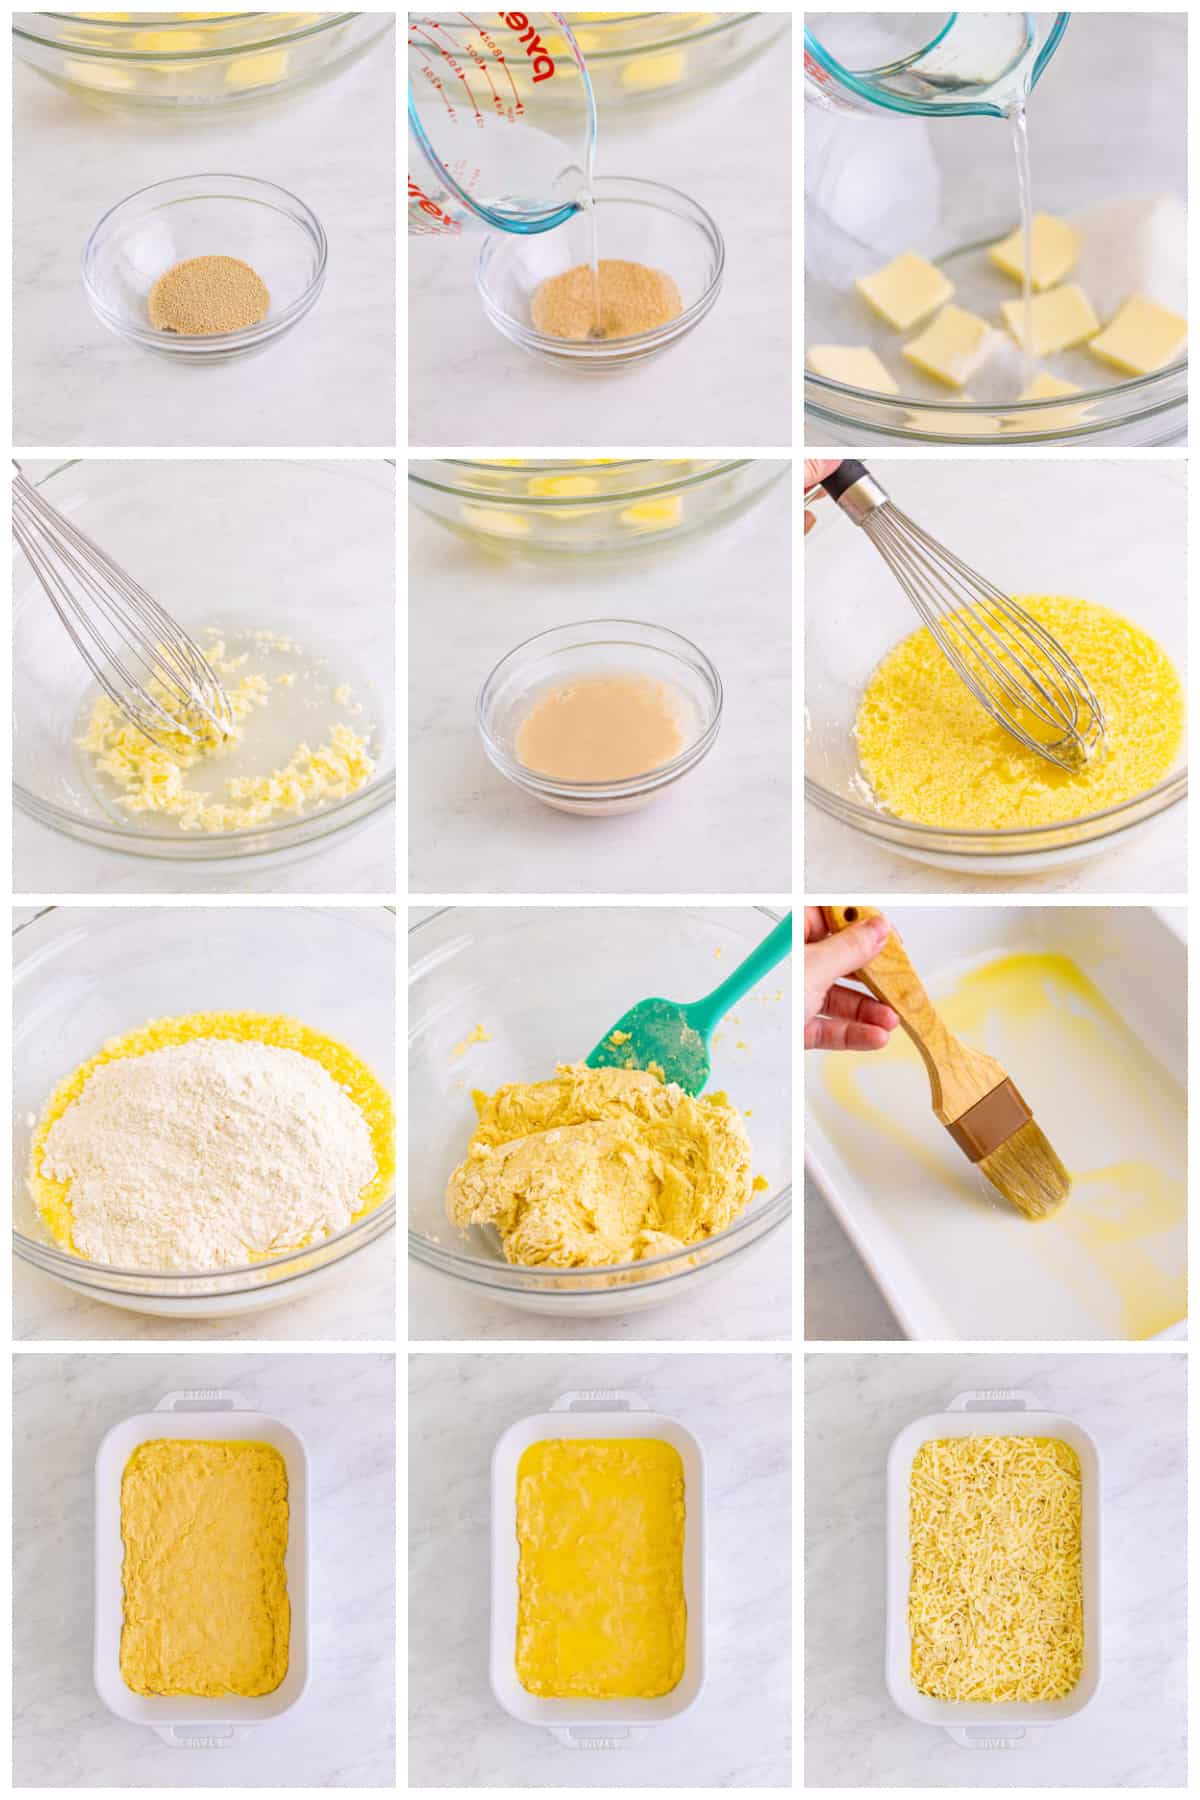 Step by step photos on how to make Pizza Hut Cheese Sticks.